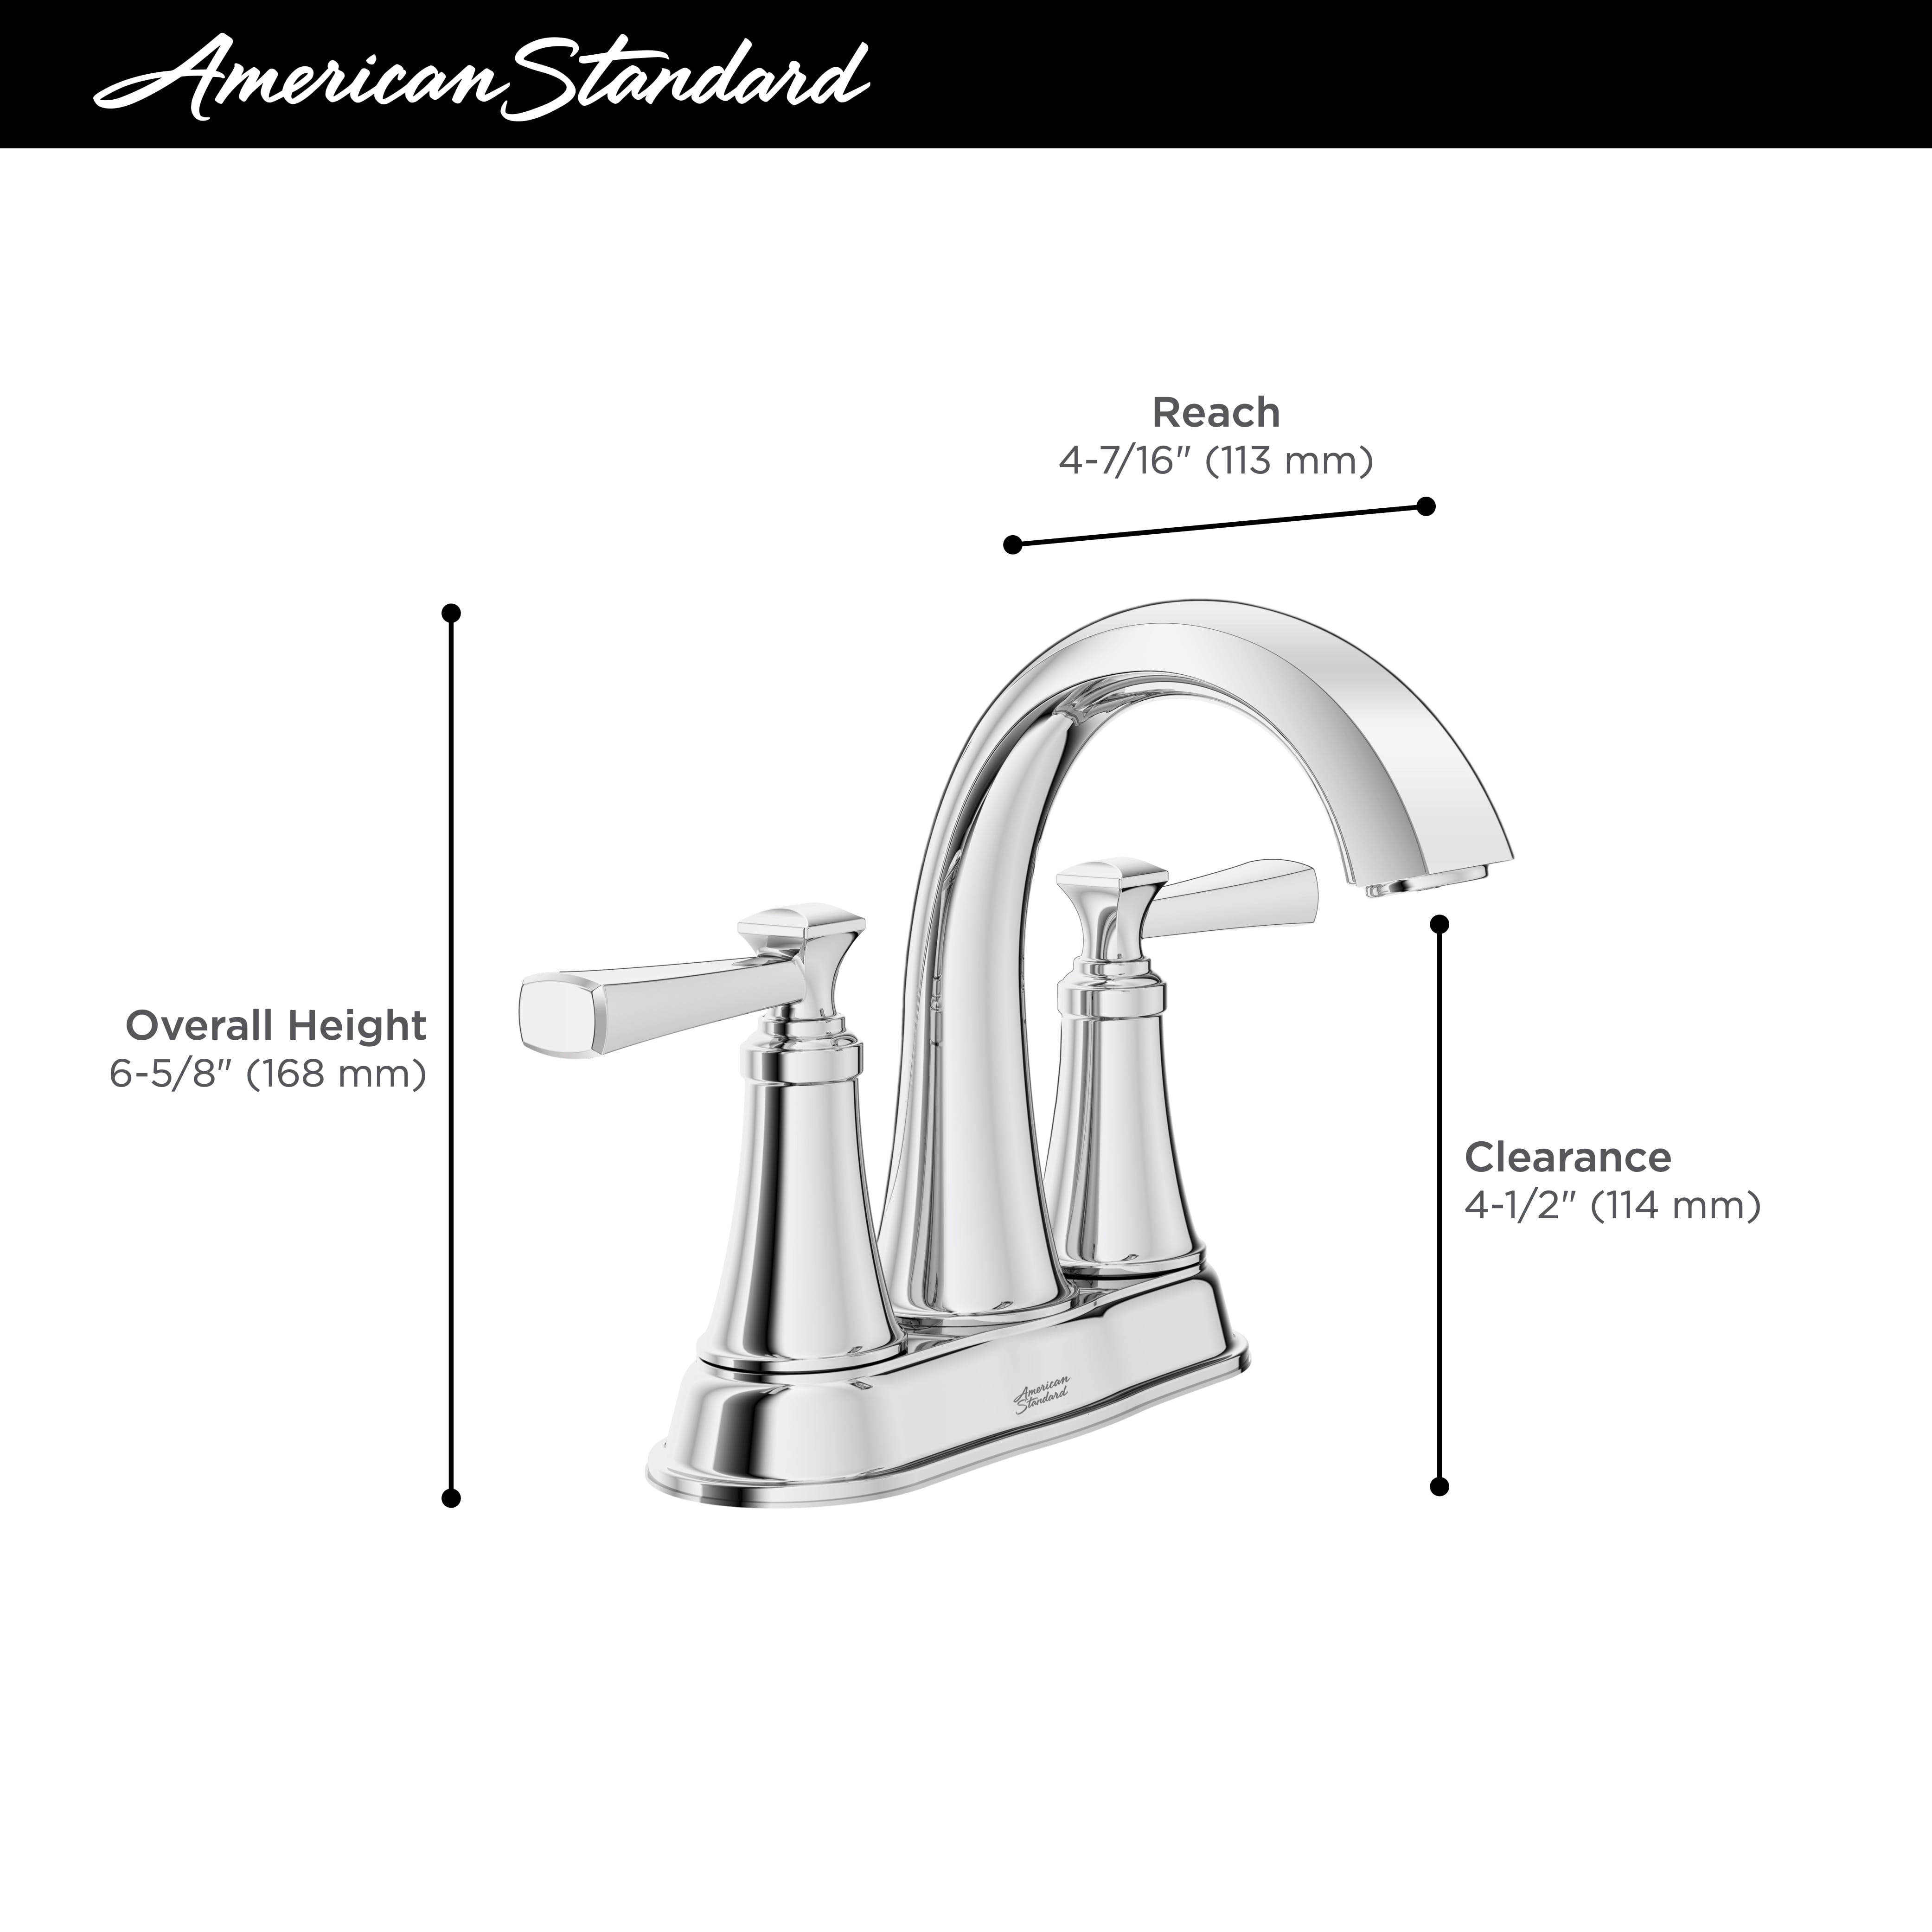 Rumson® 4-Inch Centerset 2-Handle Bathroom Faucet 1.2 gpm/4.5 L/min With Lever Handles